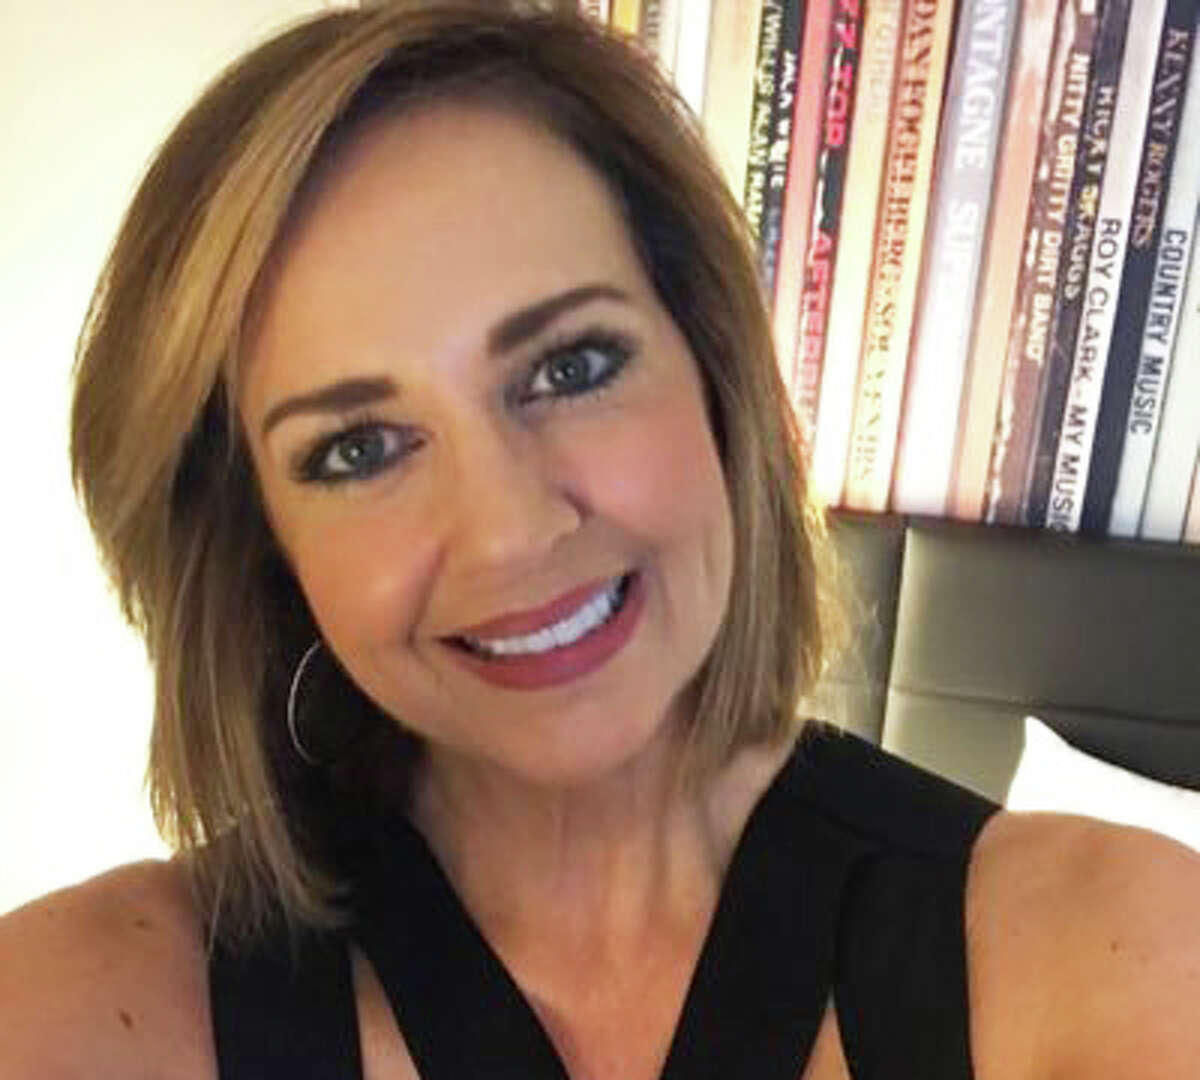 Where are they now? More San Antonio anchor updates